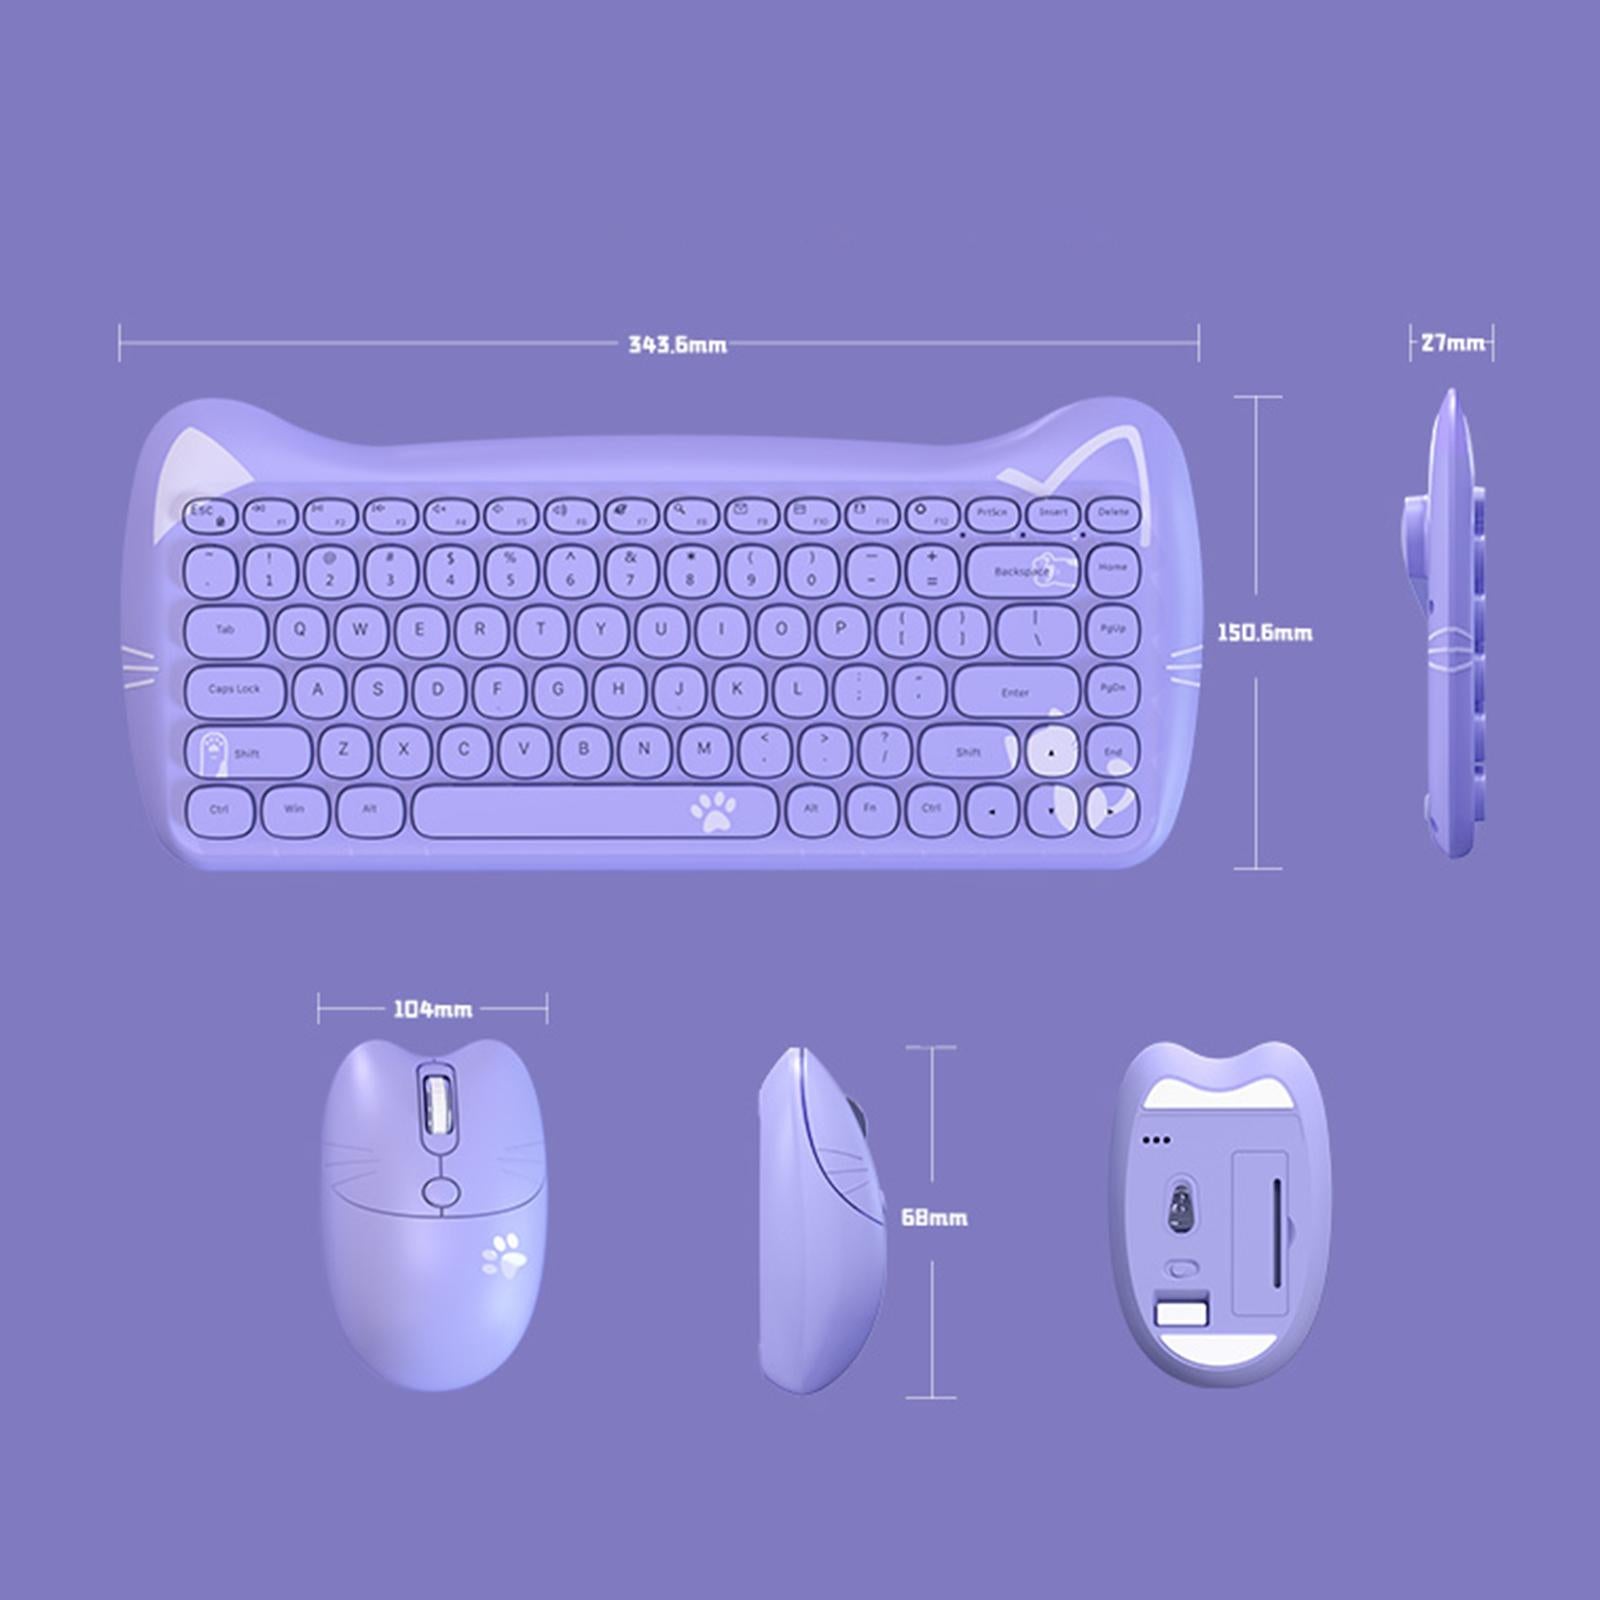 Wireless Keyboard and Mouse Set 84 Keys Silent Mouse for Notebook Pink